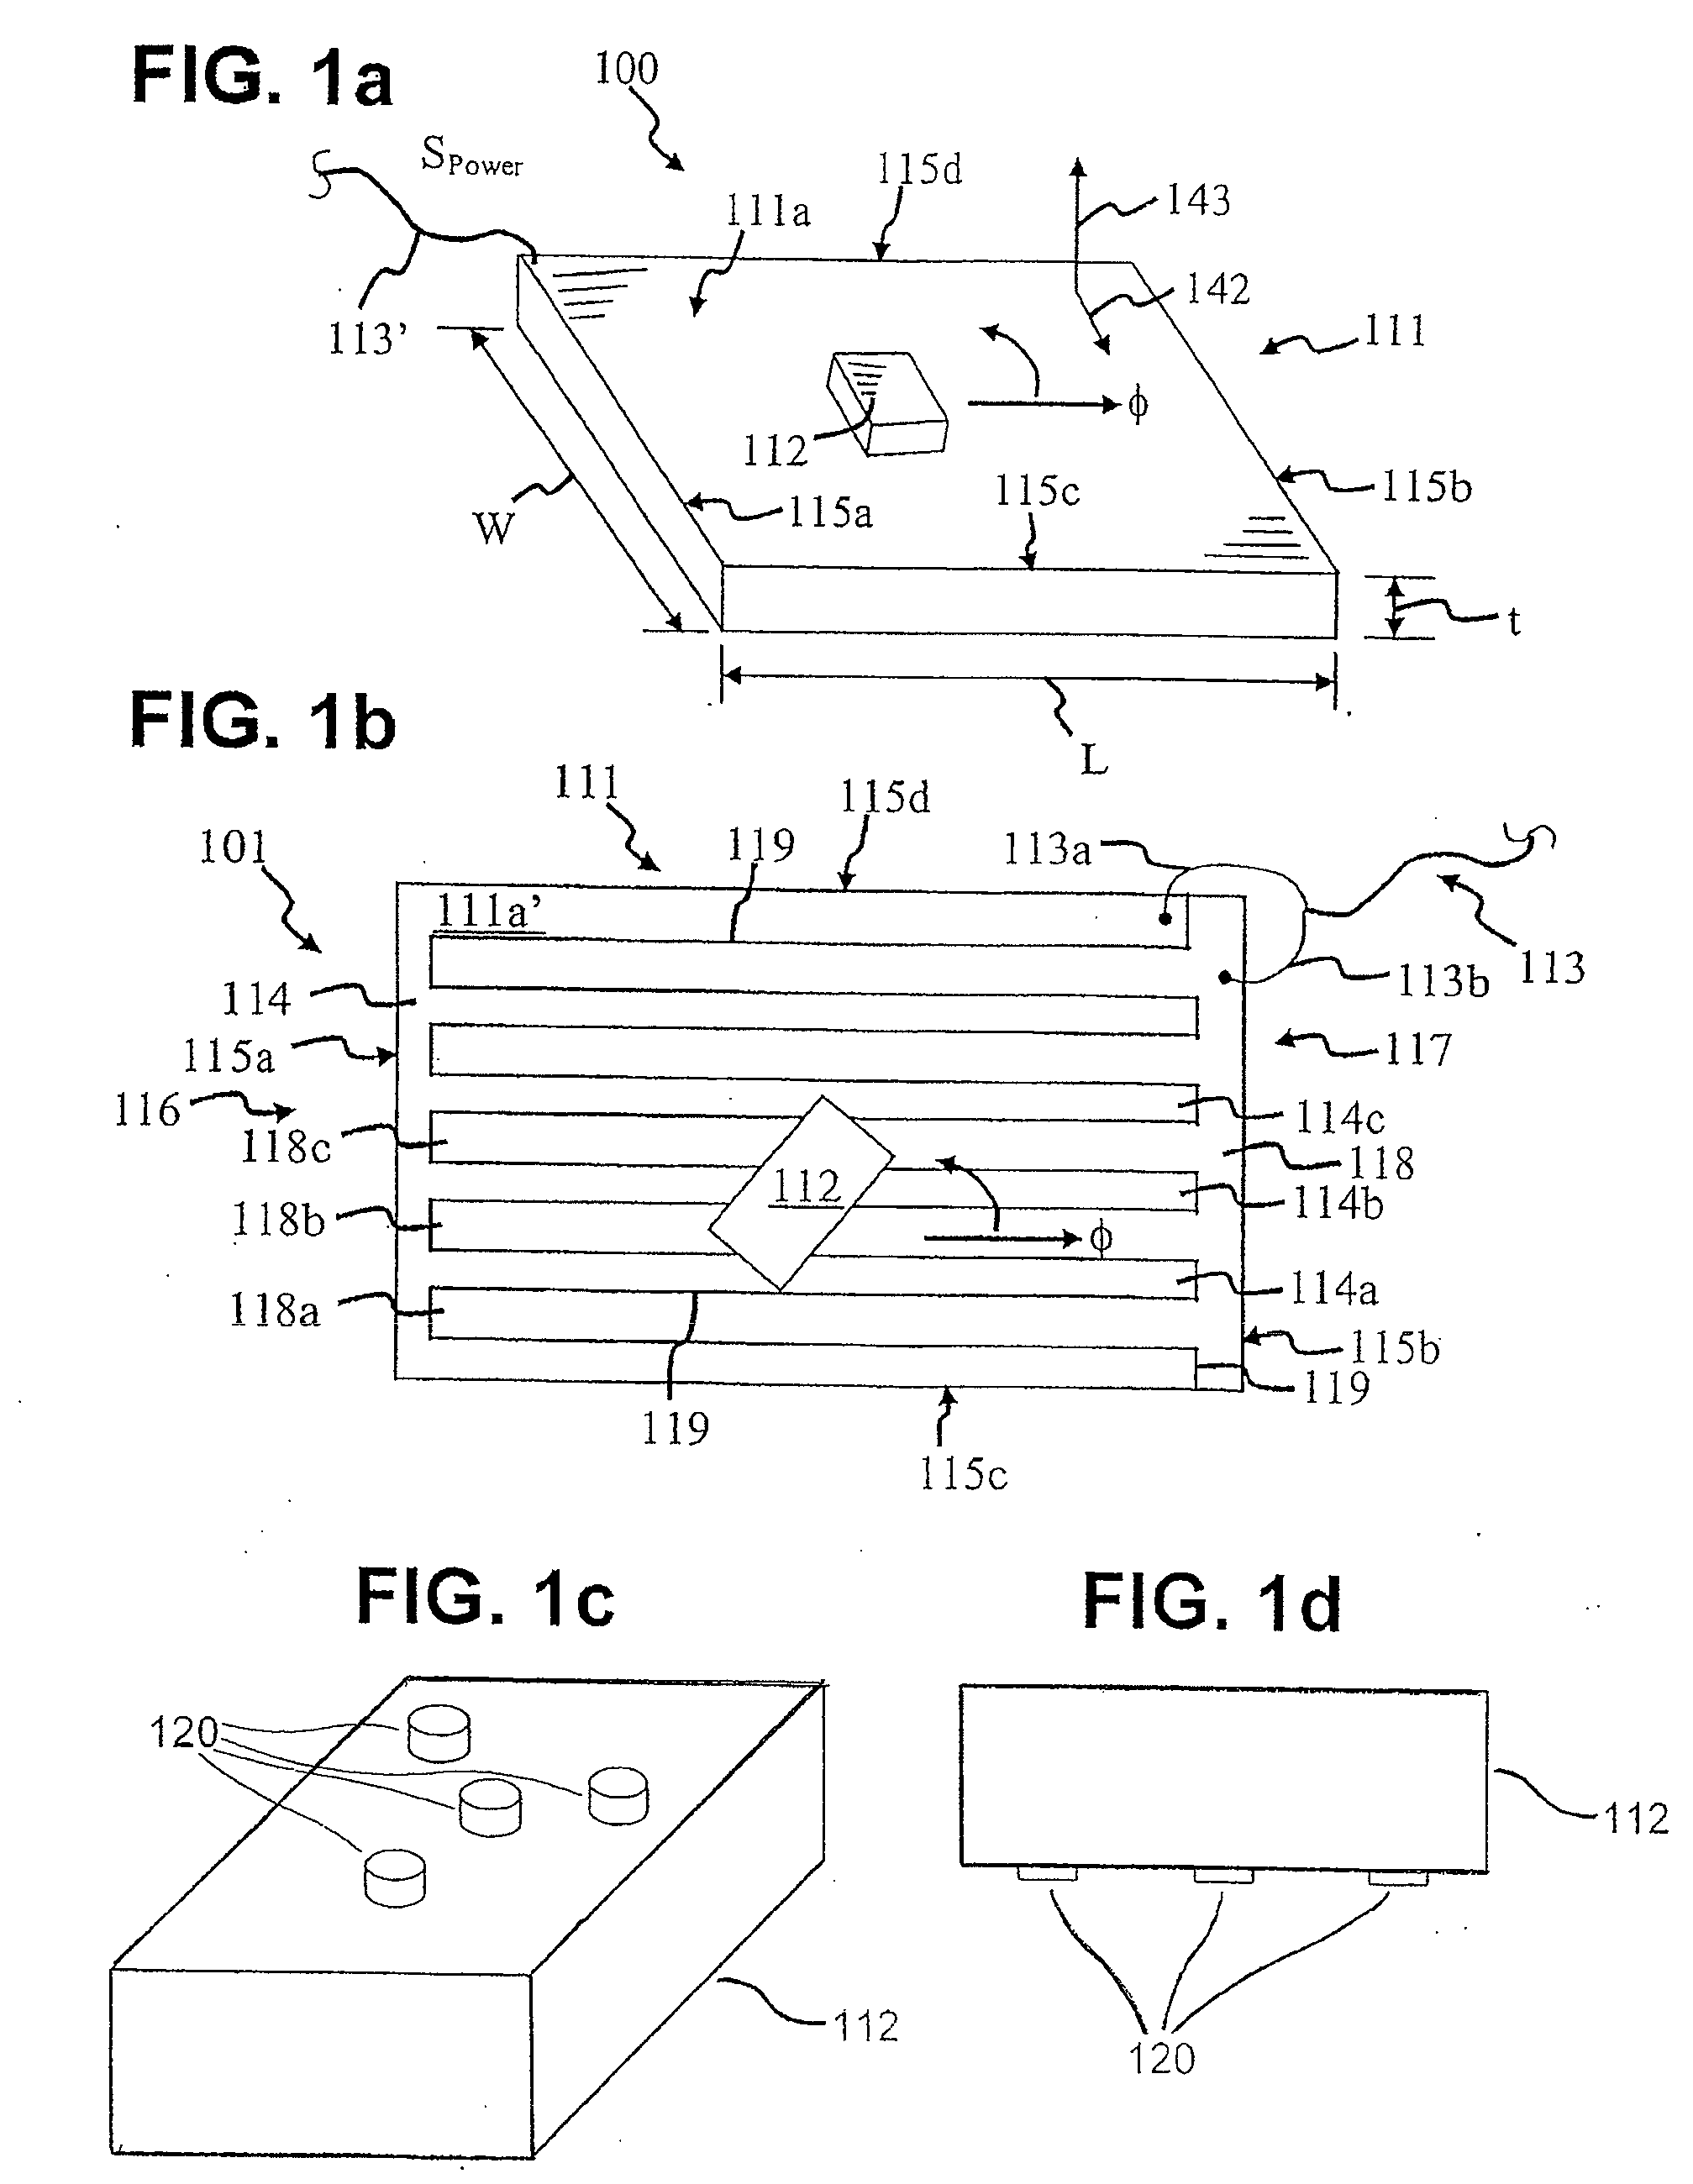 Reliable contact and safe system and method for providing power to an electronic device